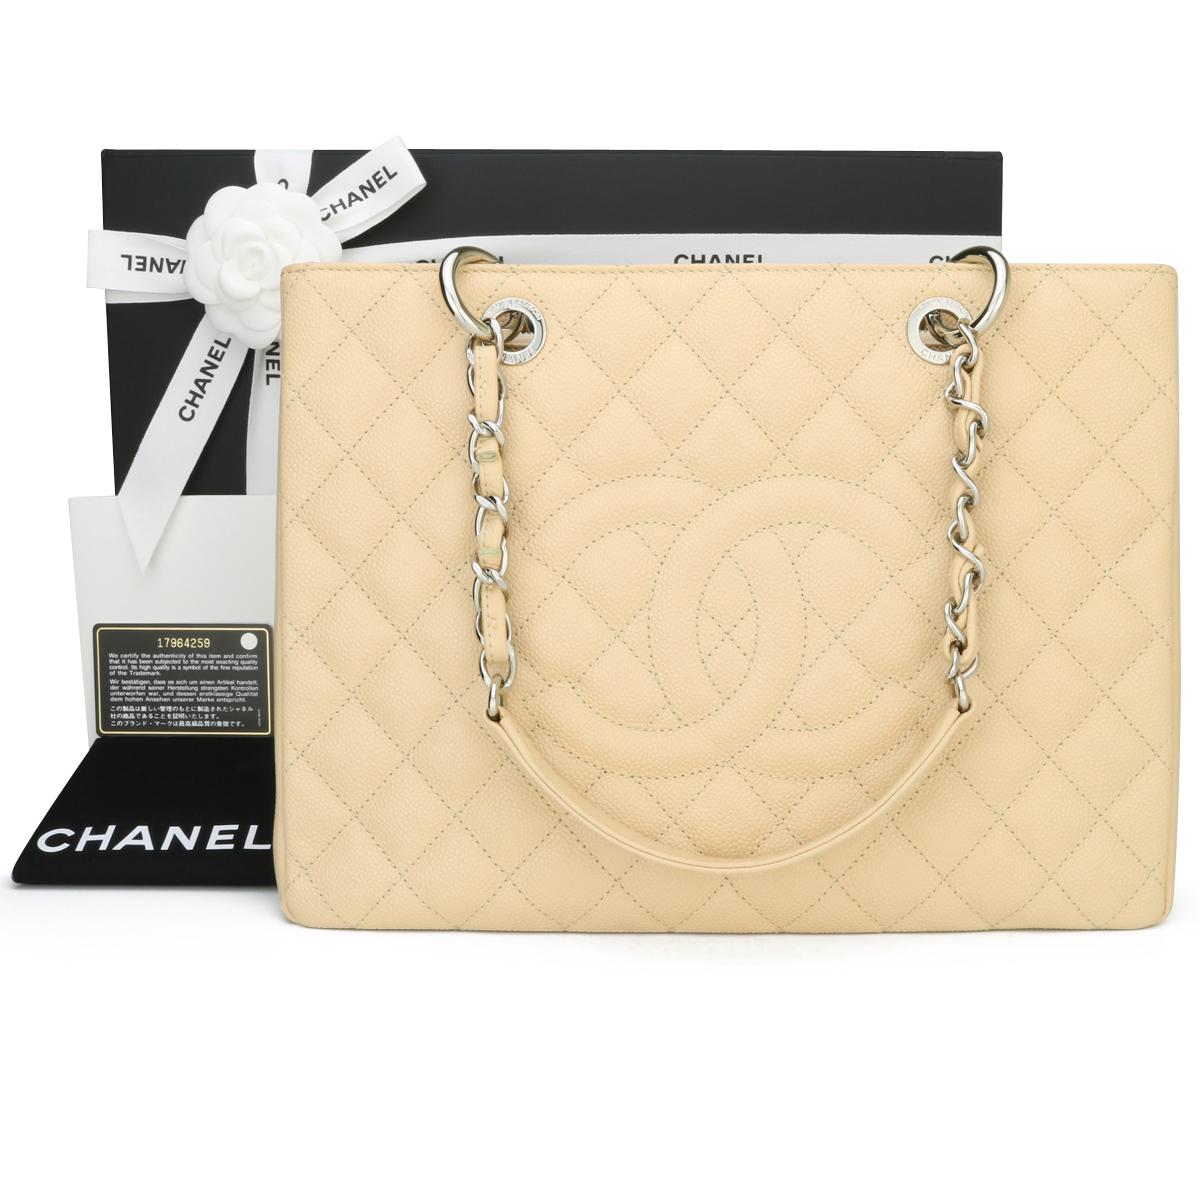 CHANEL Grand Shopping Tote (GST) Beige Caviar with Silver Hardware 2013.

This bag is in pristine condition, the bag still holds its shape well, and the hardware is still very shiny.

As Chanel has discontinued the Grand Shopping Tote (GST), it is